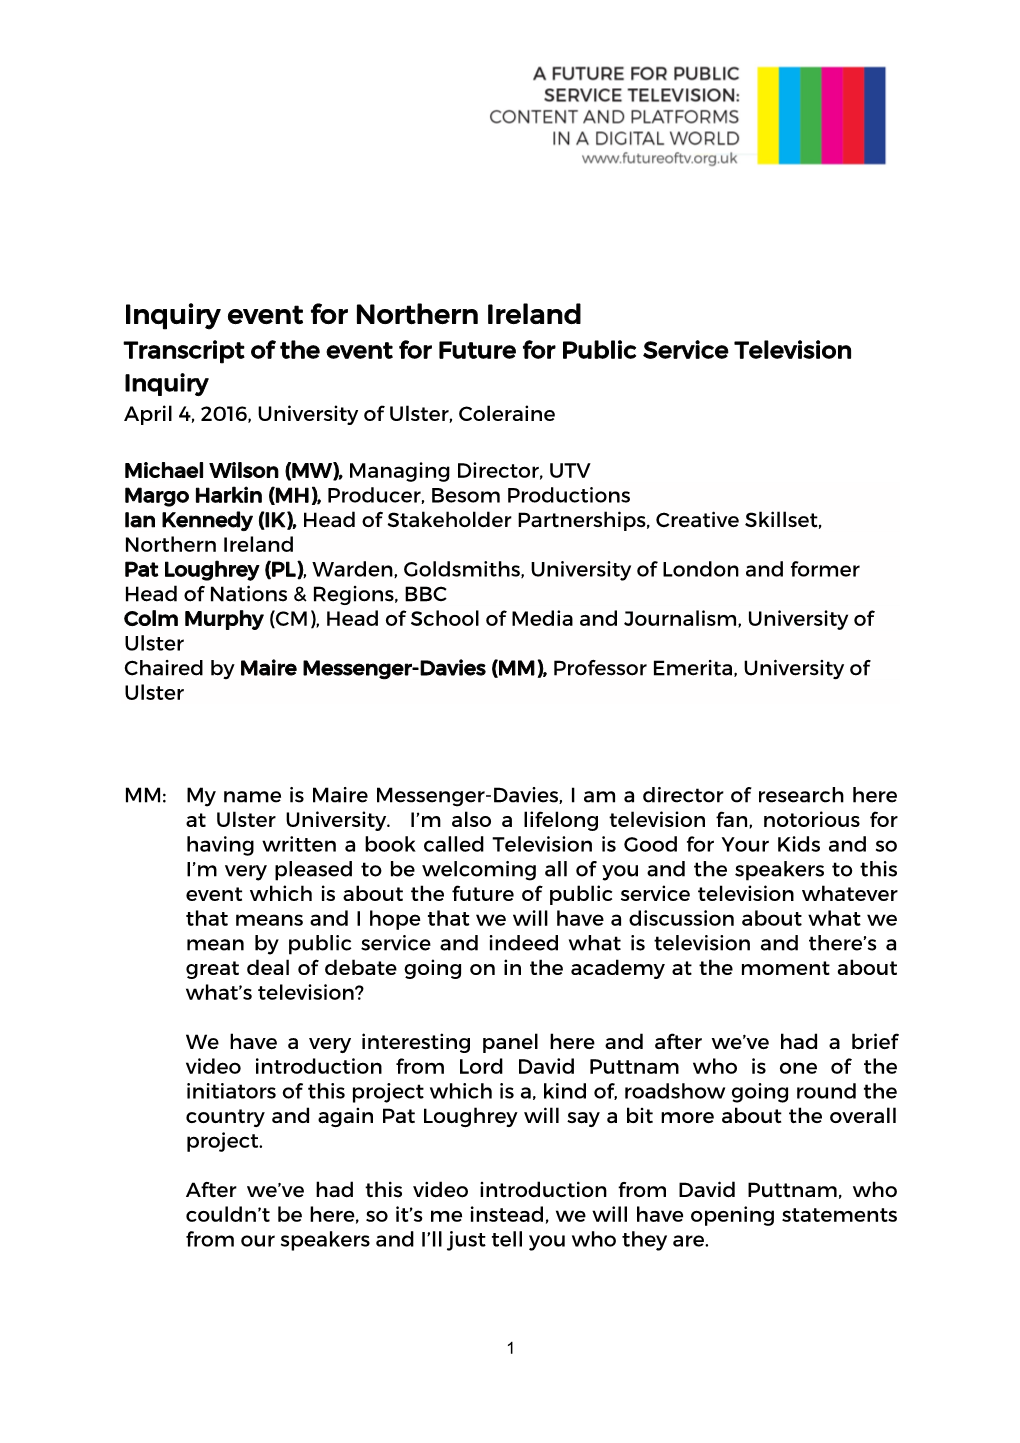 Inquiry Event for Northern Ireland Transcript of the Event for Future for Public Service Television Inquiry April 4, 2016, University of Ulster, Coleraine